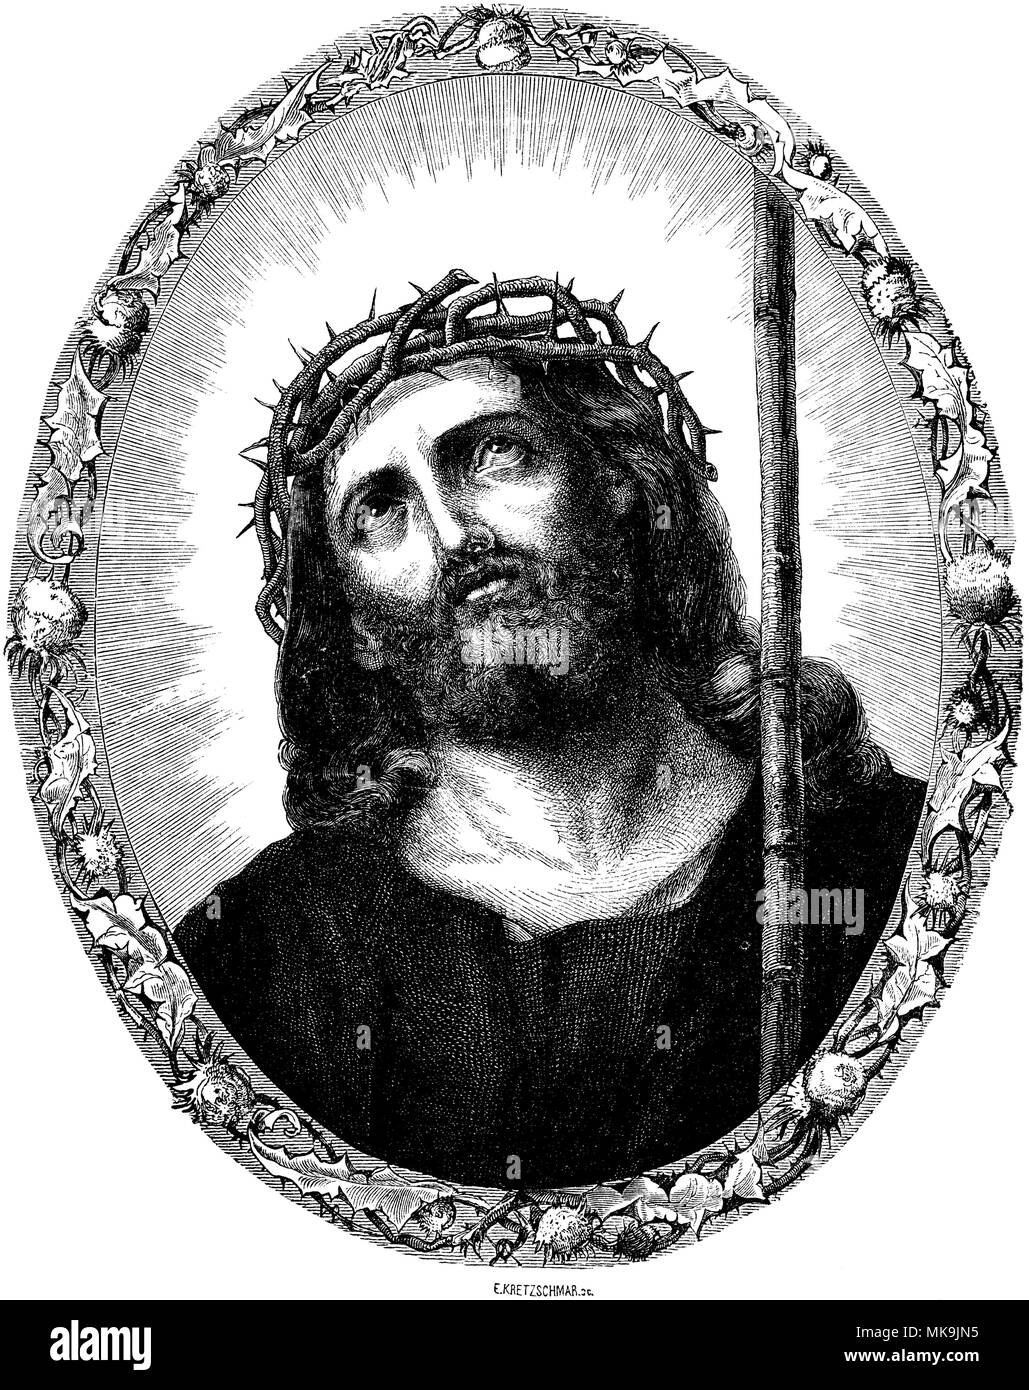 Jesus Christ with crown of thorns as a martyr;Jesus Christus with crown of thorns as a martyr, E. Kretzschmar  1863 Stock Photo